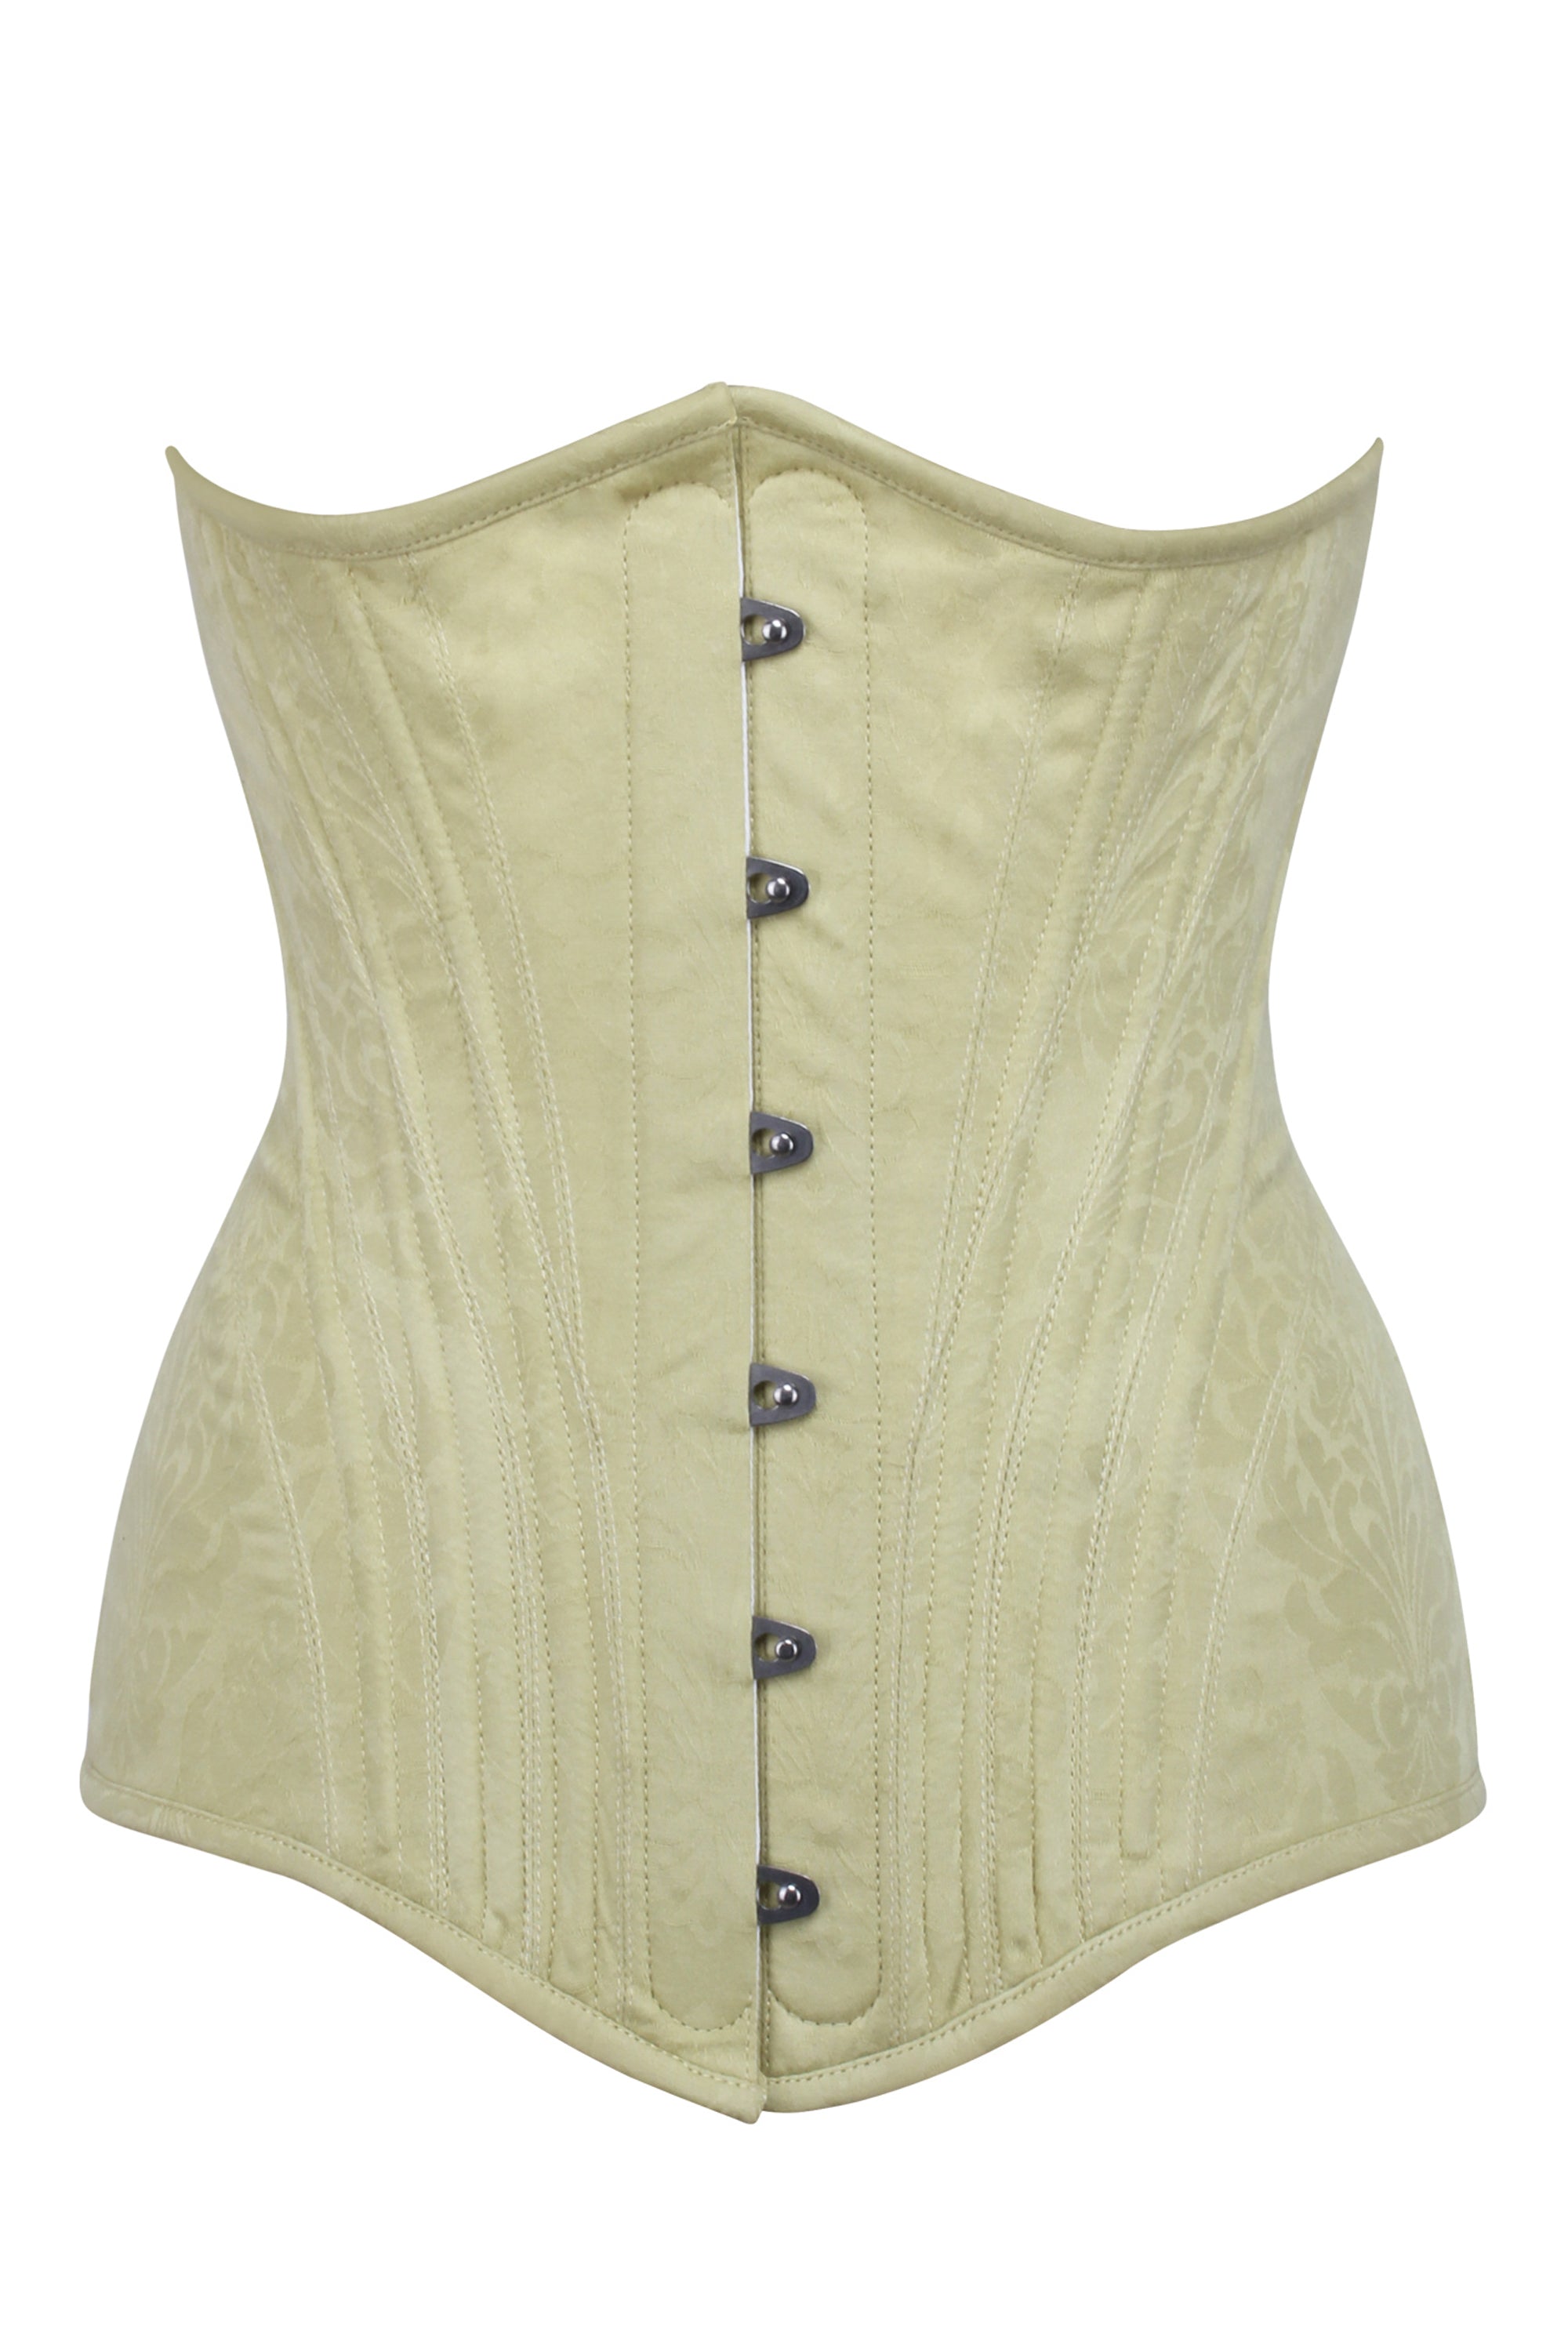 Buy Medical Support Corsets, Adjustable Fit Corsets & Top-Notch